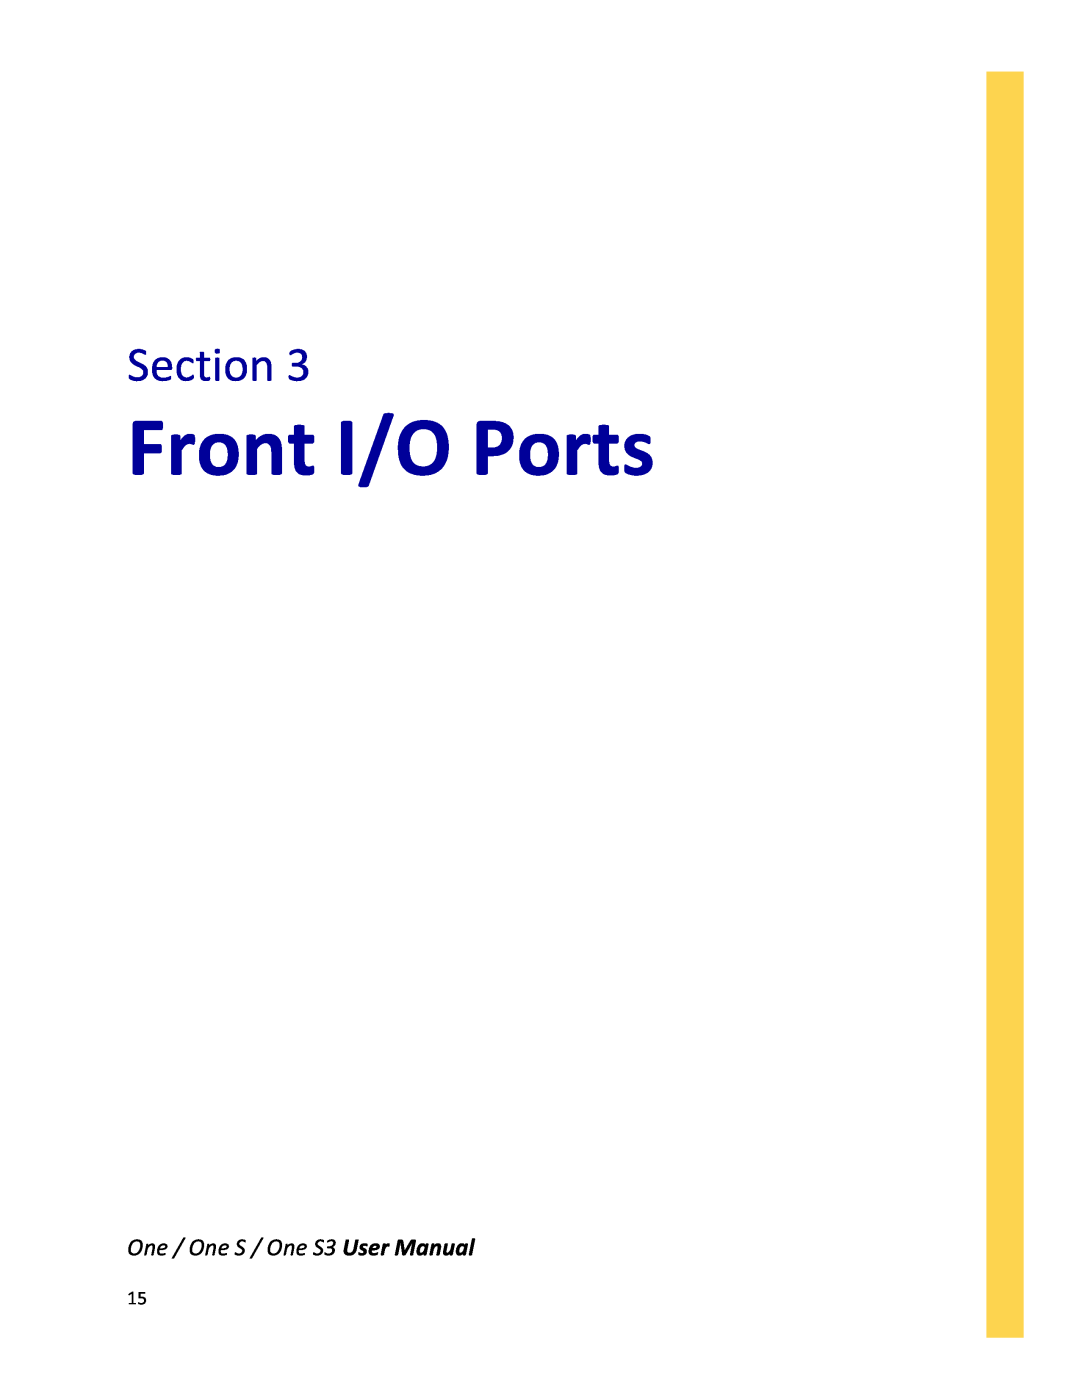 Antec ONE S3 user manual Front I/O Ports, Section, One / One S / One S3 User Manual 